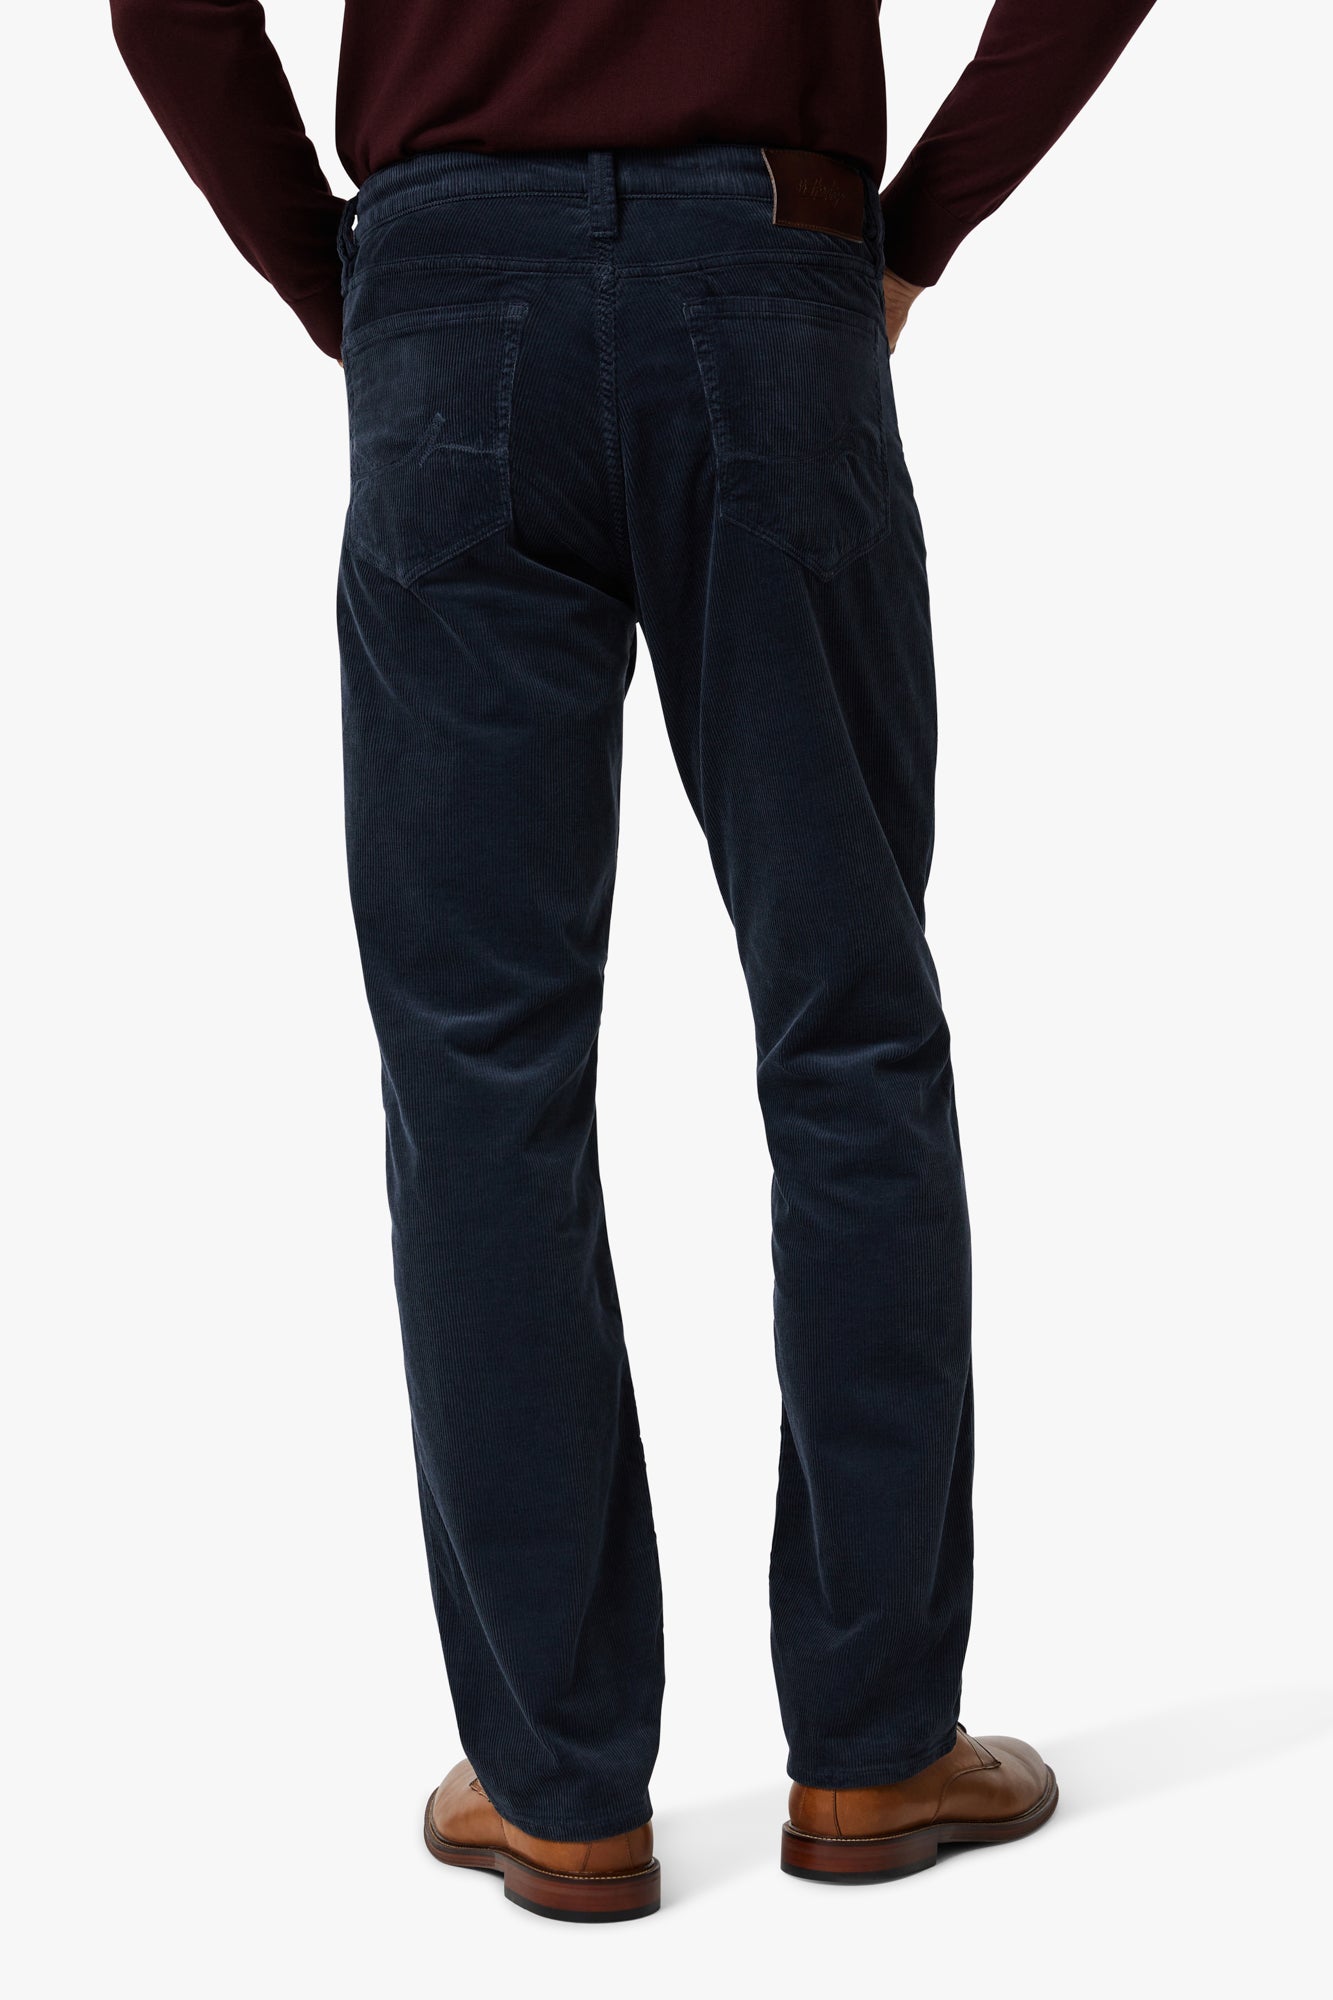 Charisma Relaxed Straight Pants In Navy Cord Image 4